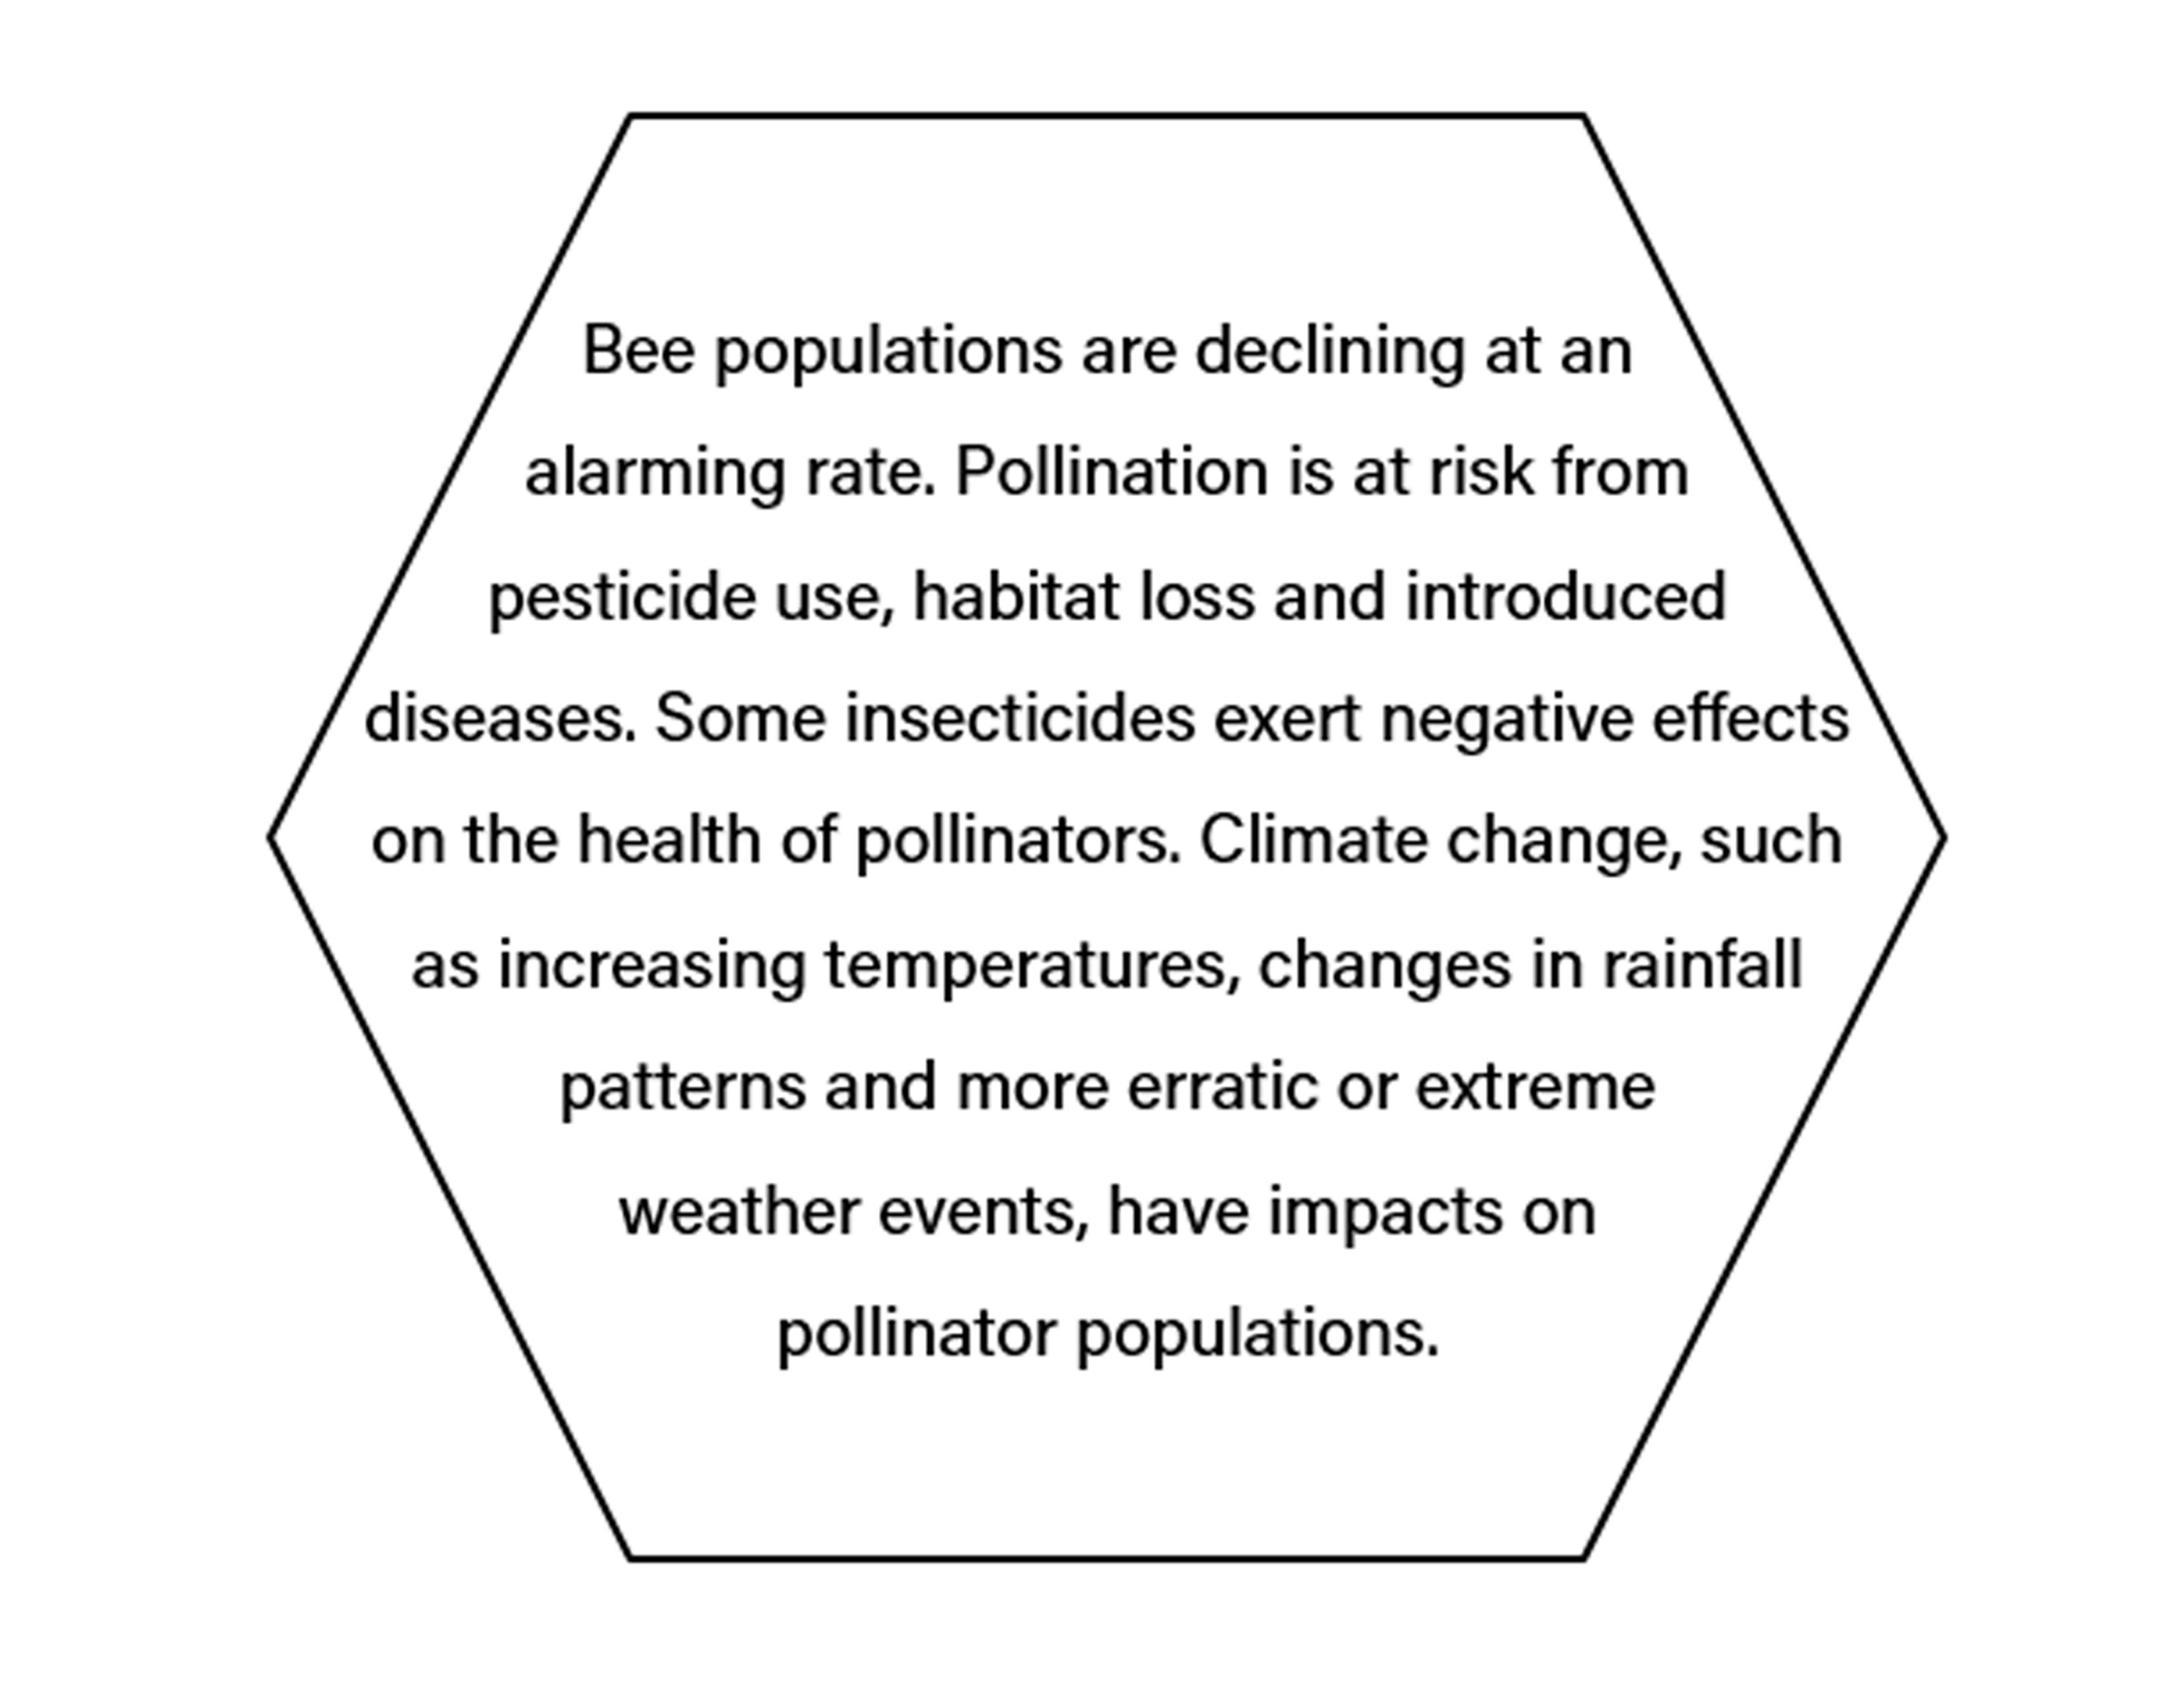 Bee populations are declining at an
alarming rate. Pollination is at risk from pesticide use, habitat loss and introduced diseases. Some insecticides exert negative effects on the health of pollinators. Climate change, such as increasing temperatures, changes in rainfall patterns and more erratic or extreme weather events, have impacts on pollinator populations.